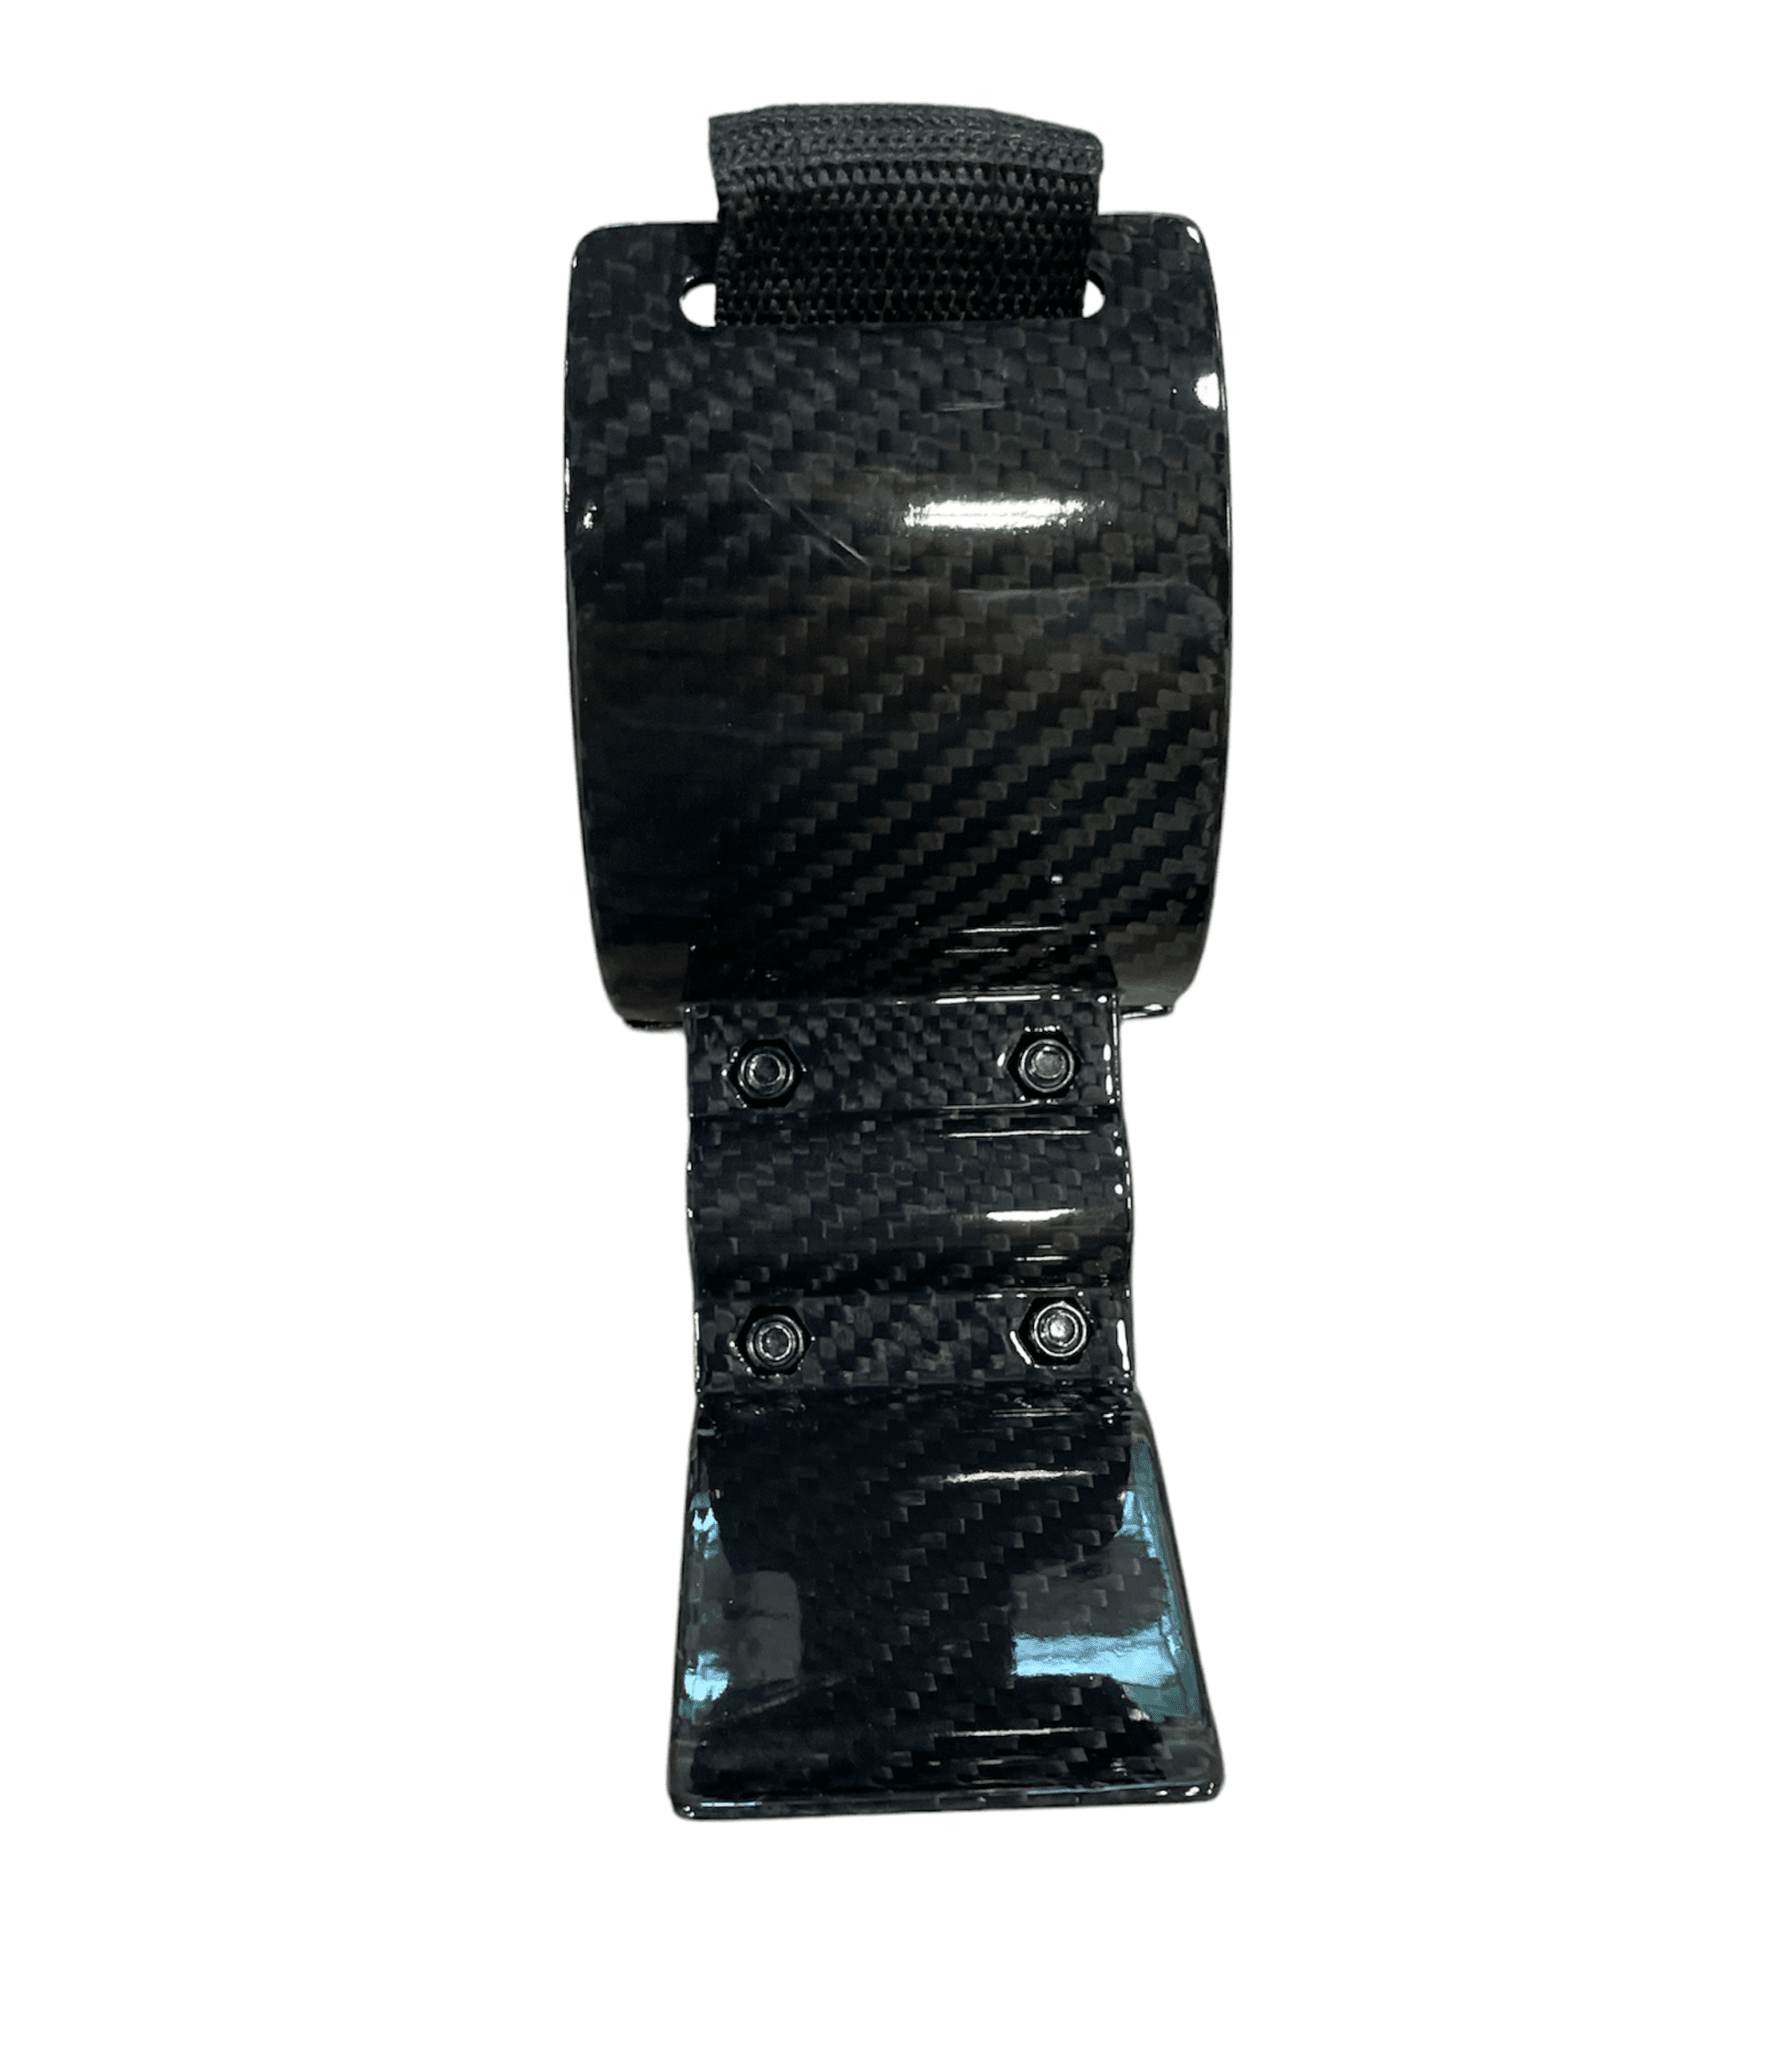 Carbon fiber arm cuff for equinox, gold monster, and Excalibur, and GPX 4500/4800/5000 side view